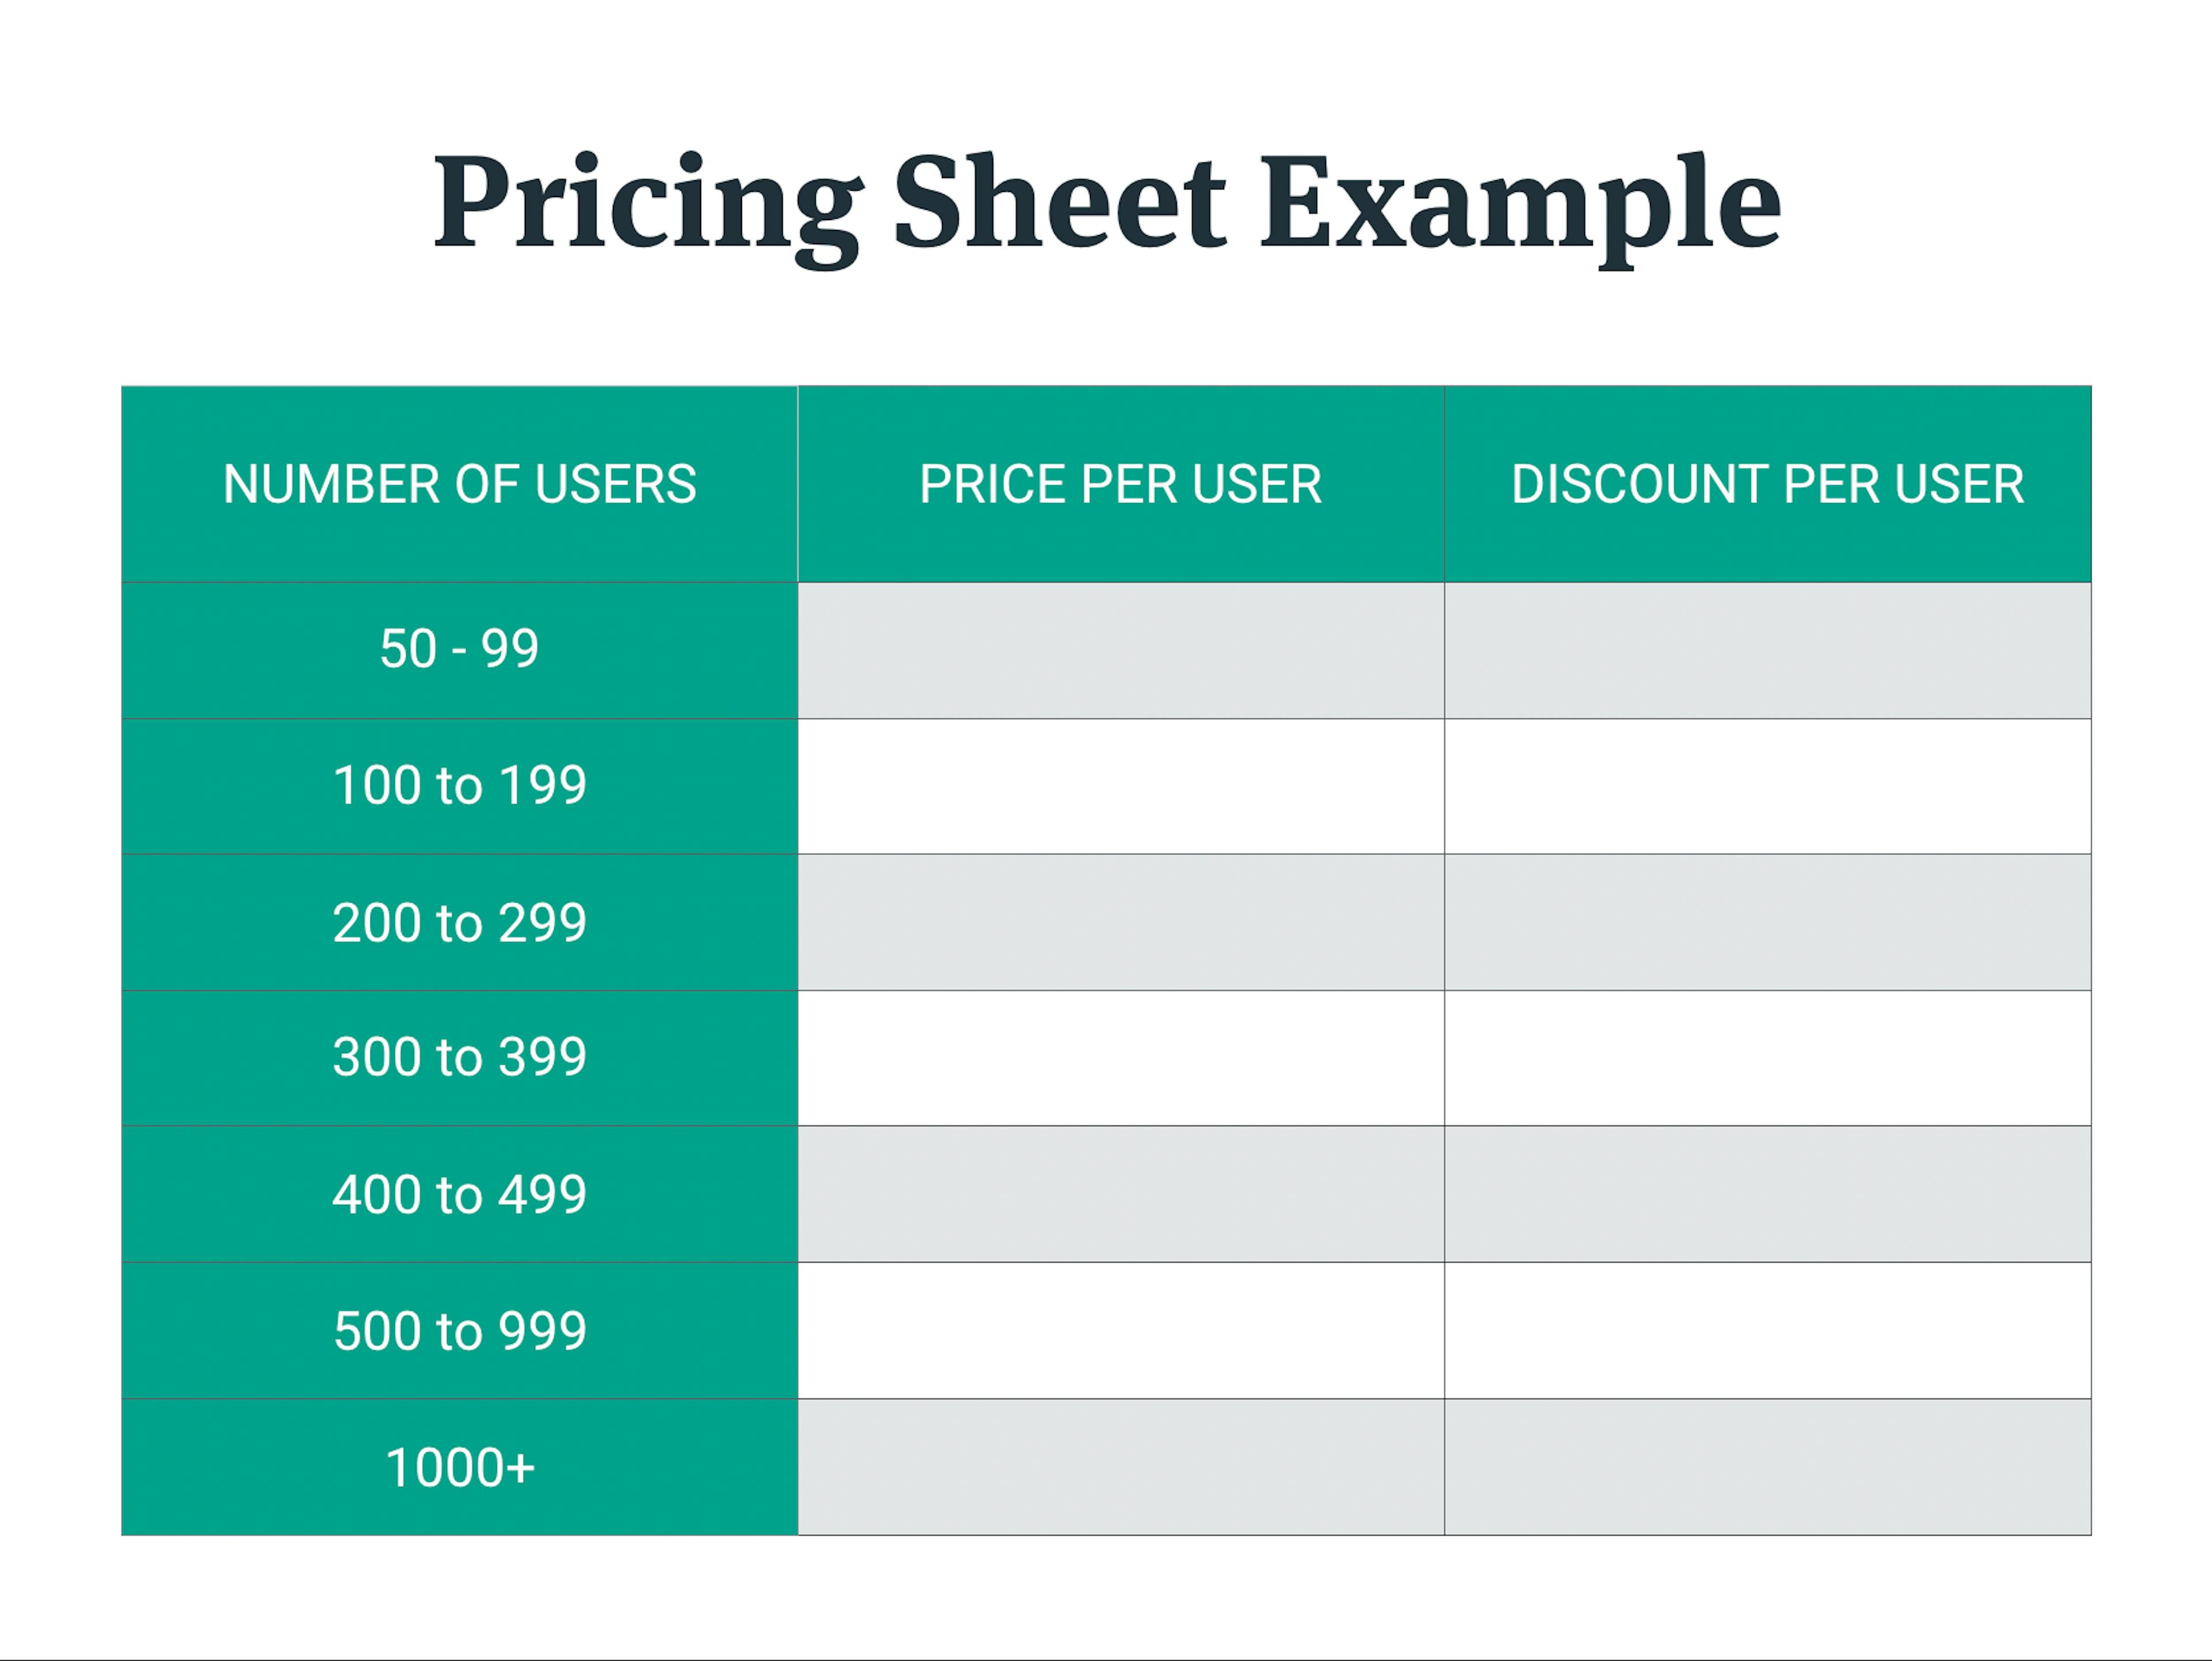 Pricing sheet example table: Columns headed number of users, price per user, discount per user